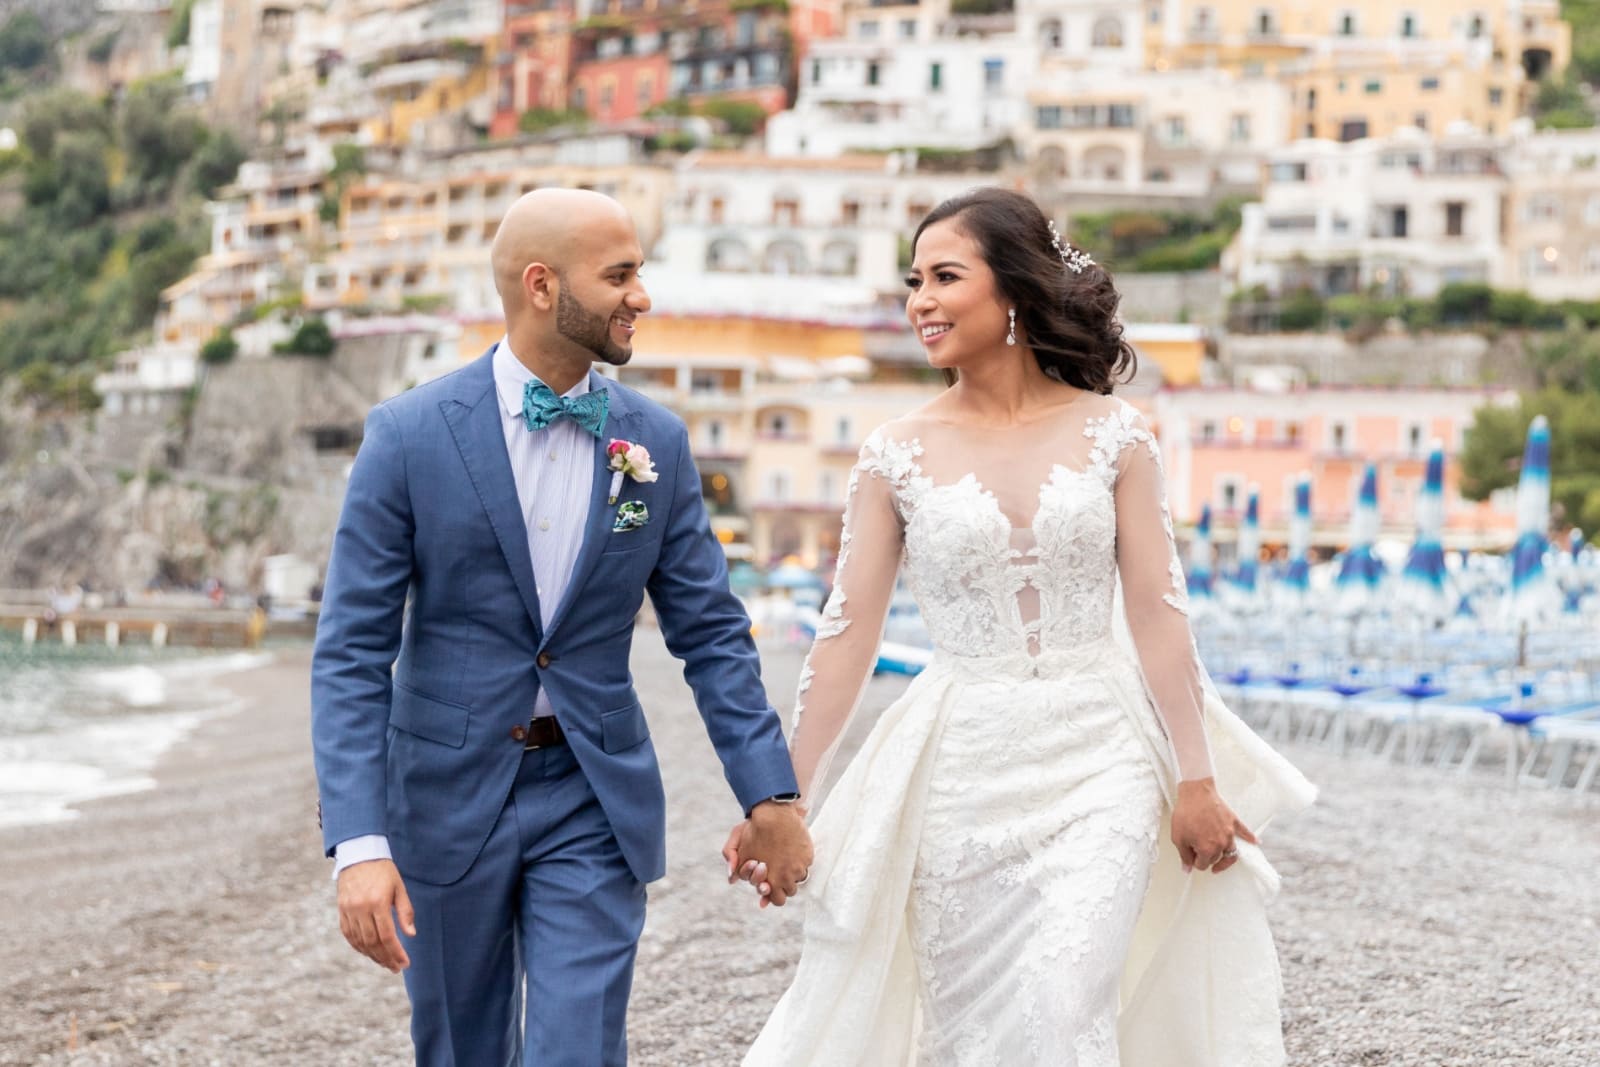 Destination Weddings: Everything You Need To Know To Plan Your Destination  Wedding in Positano